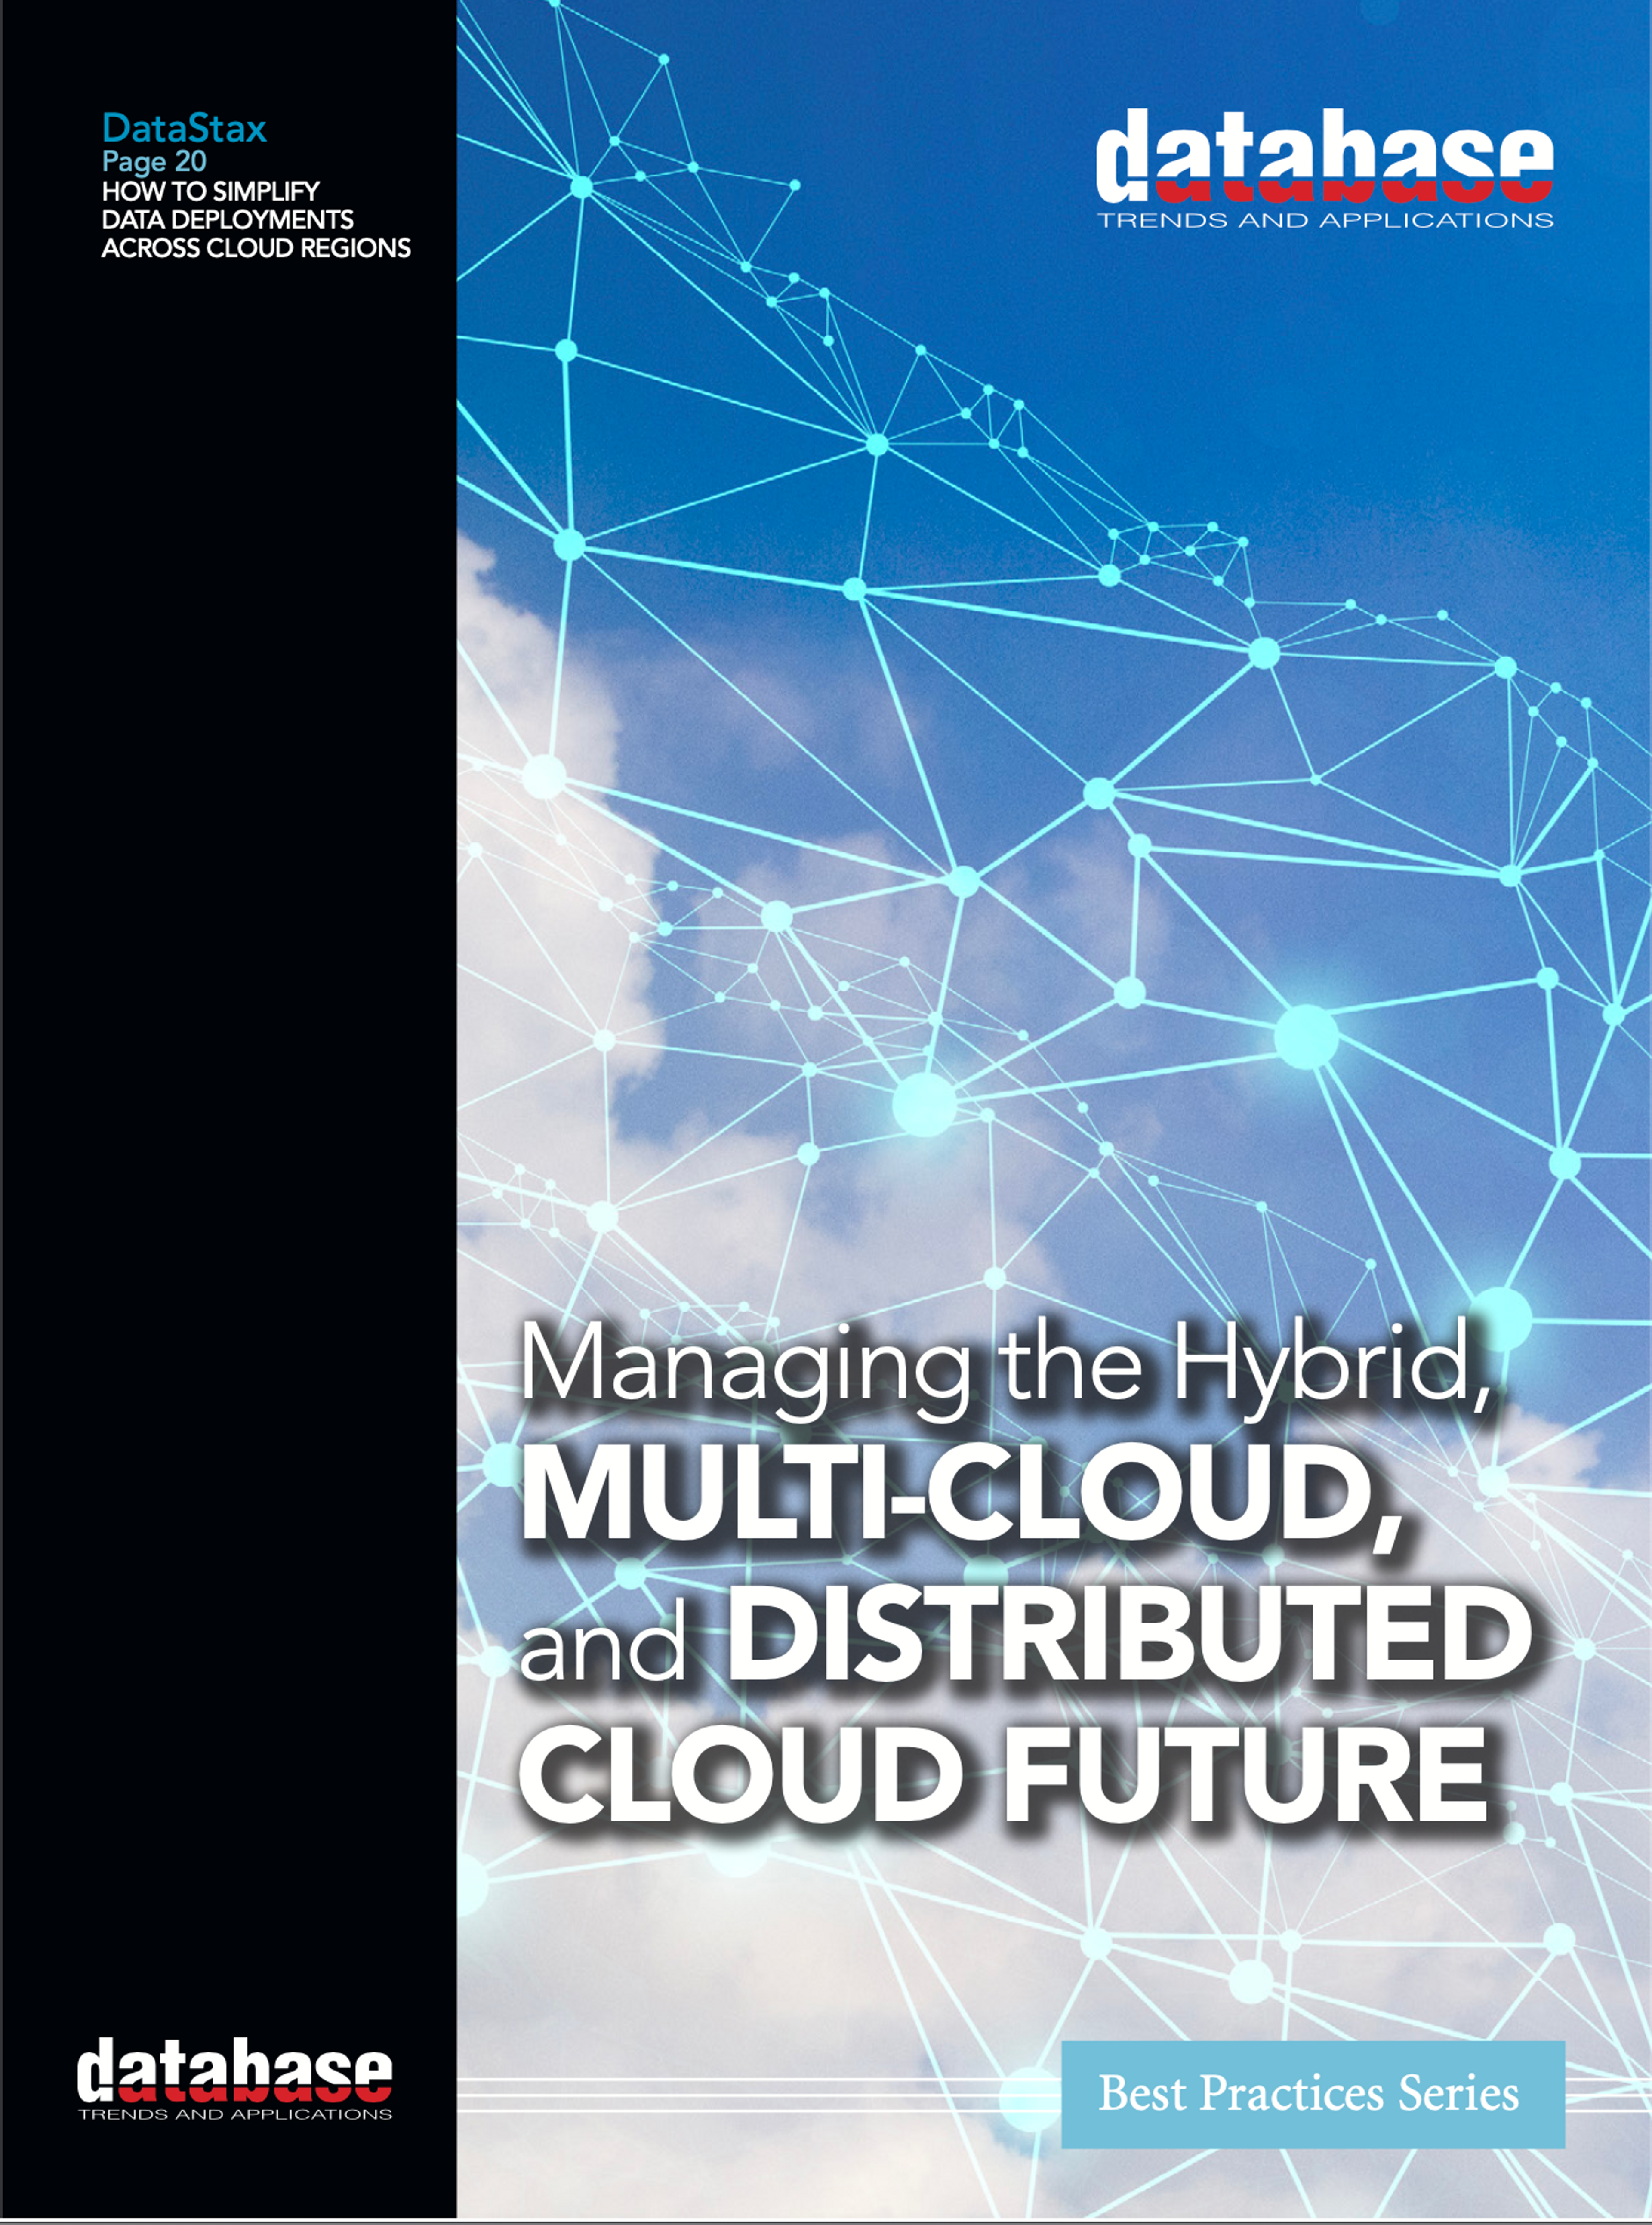 Database Trends and Applications Report: Managing the Hybrid, Multi-Cloud, and Distributed Cloud Future